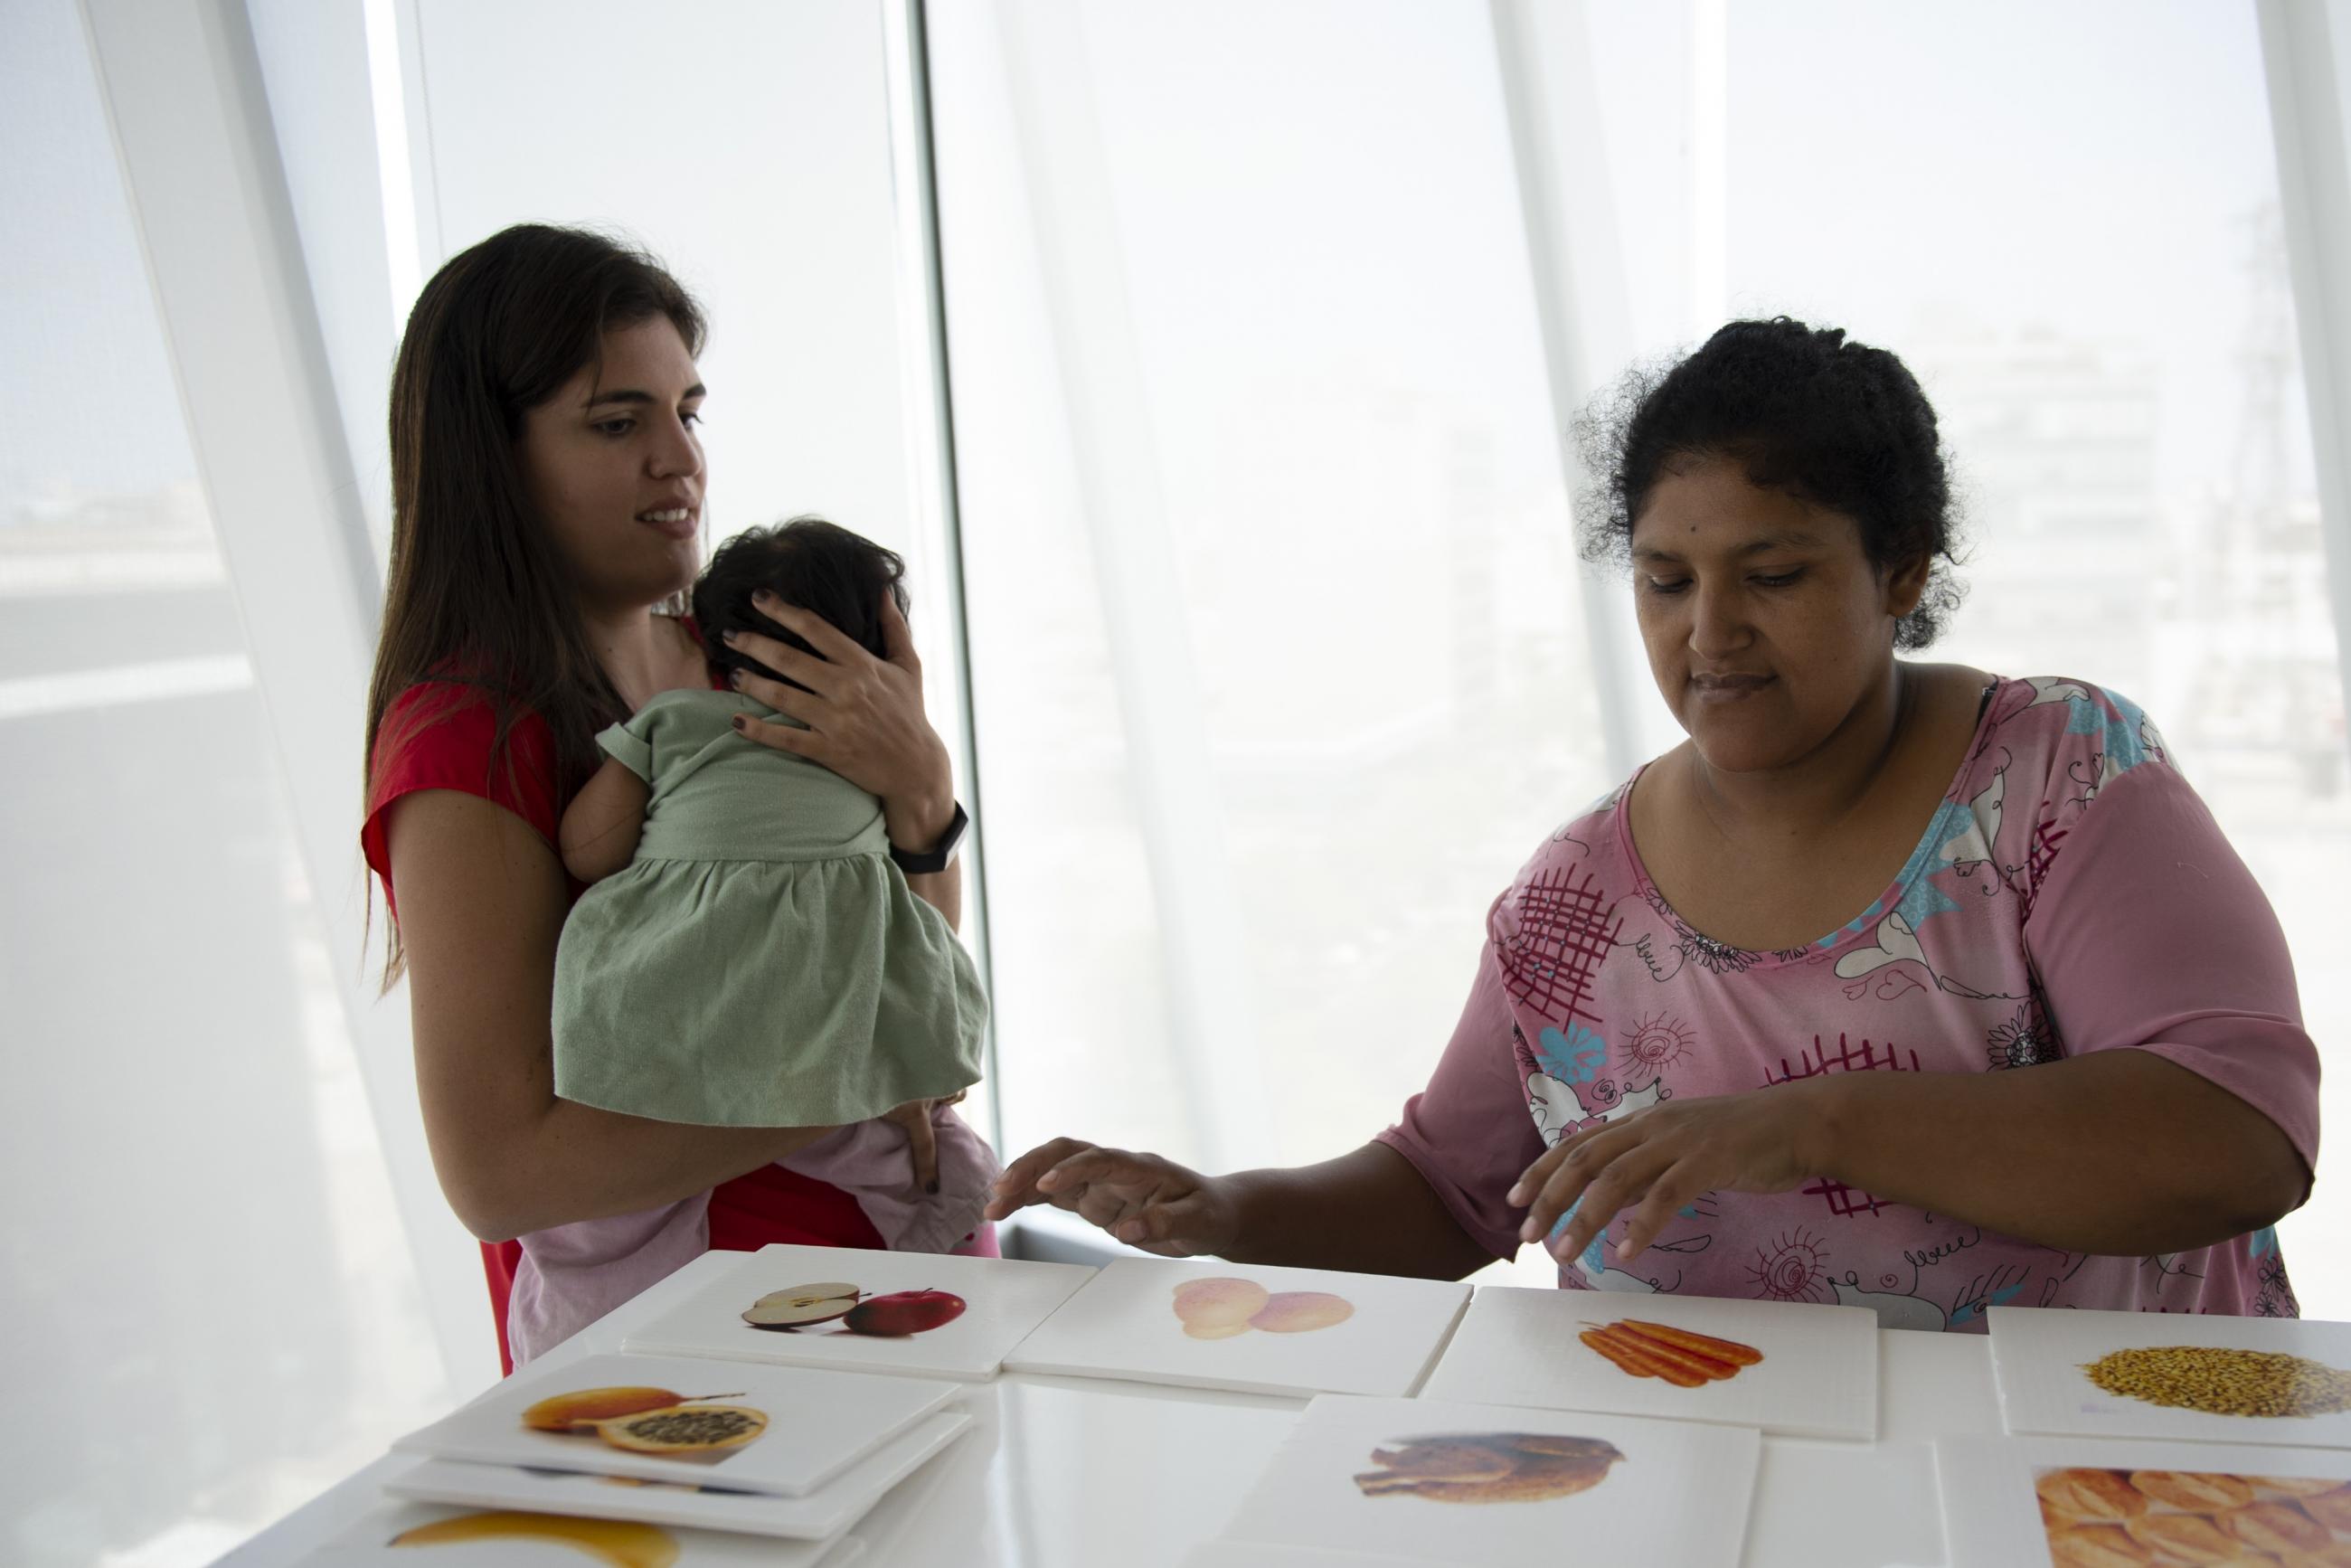 Two women stand at a table, looking at pictures of healthy food options. One woman is holding a baby.